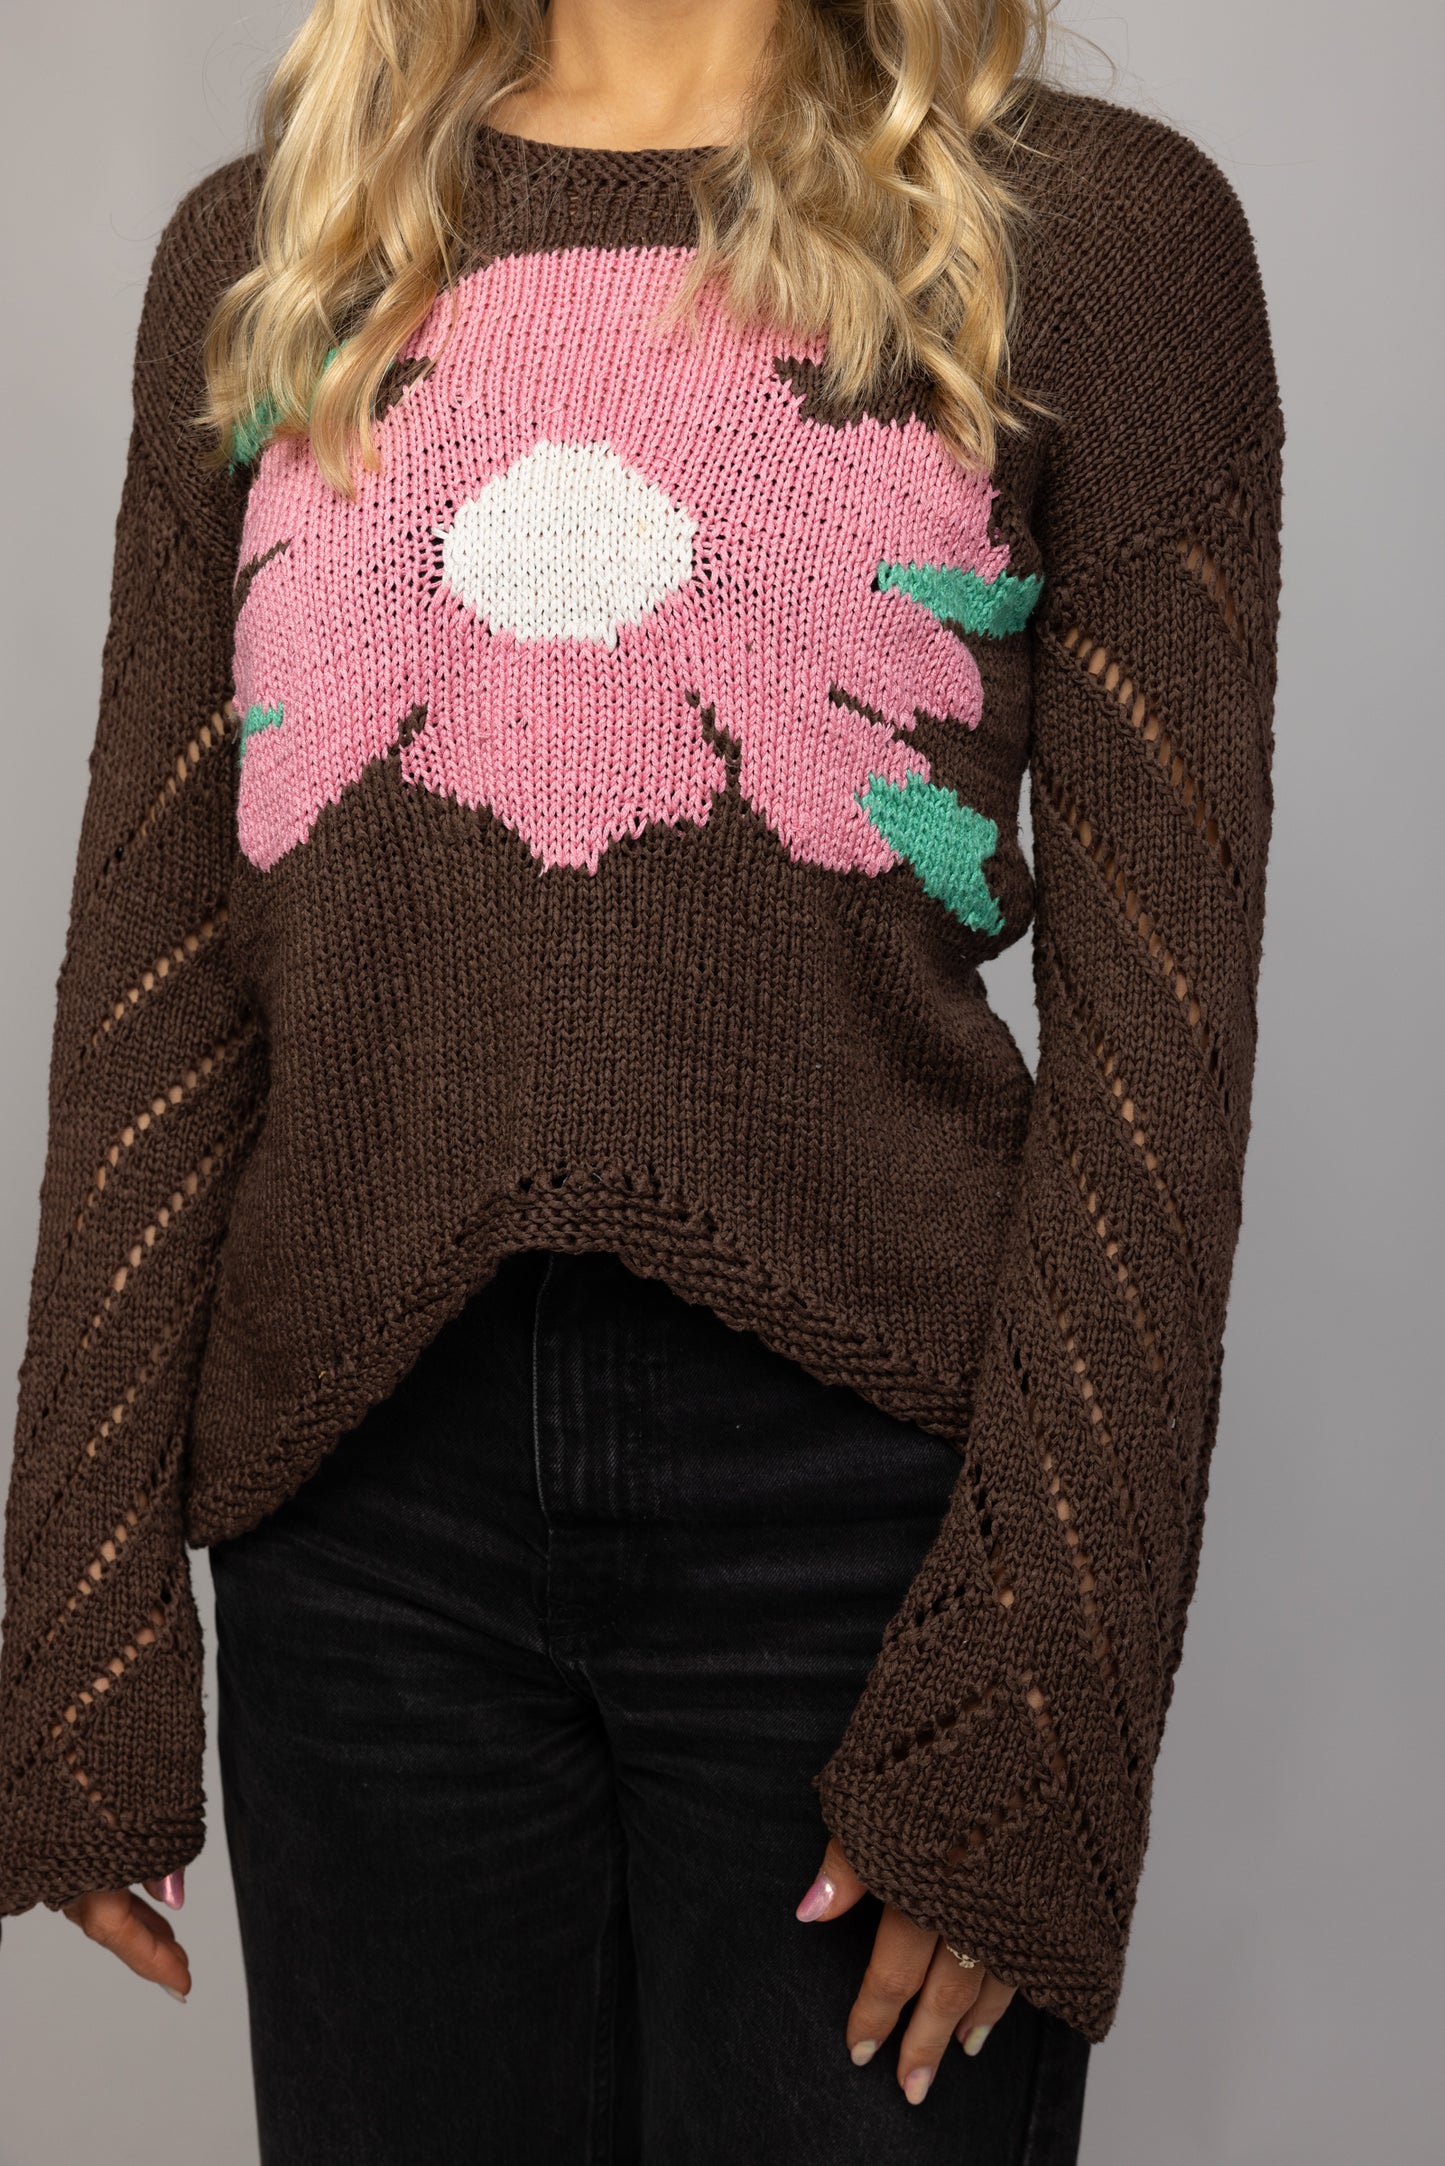 1970's Crochet Floral Whimsical Knit M